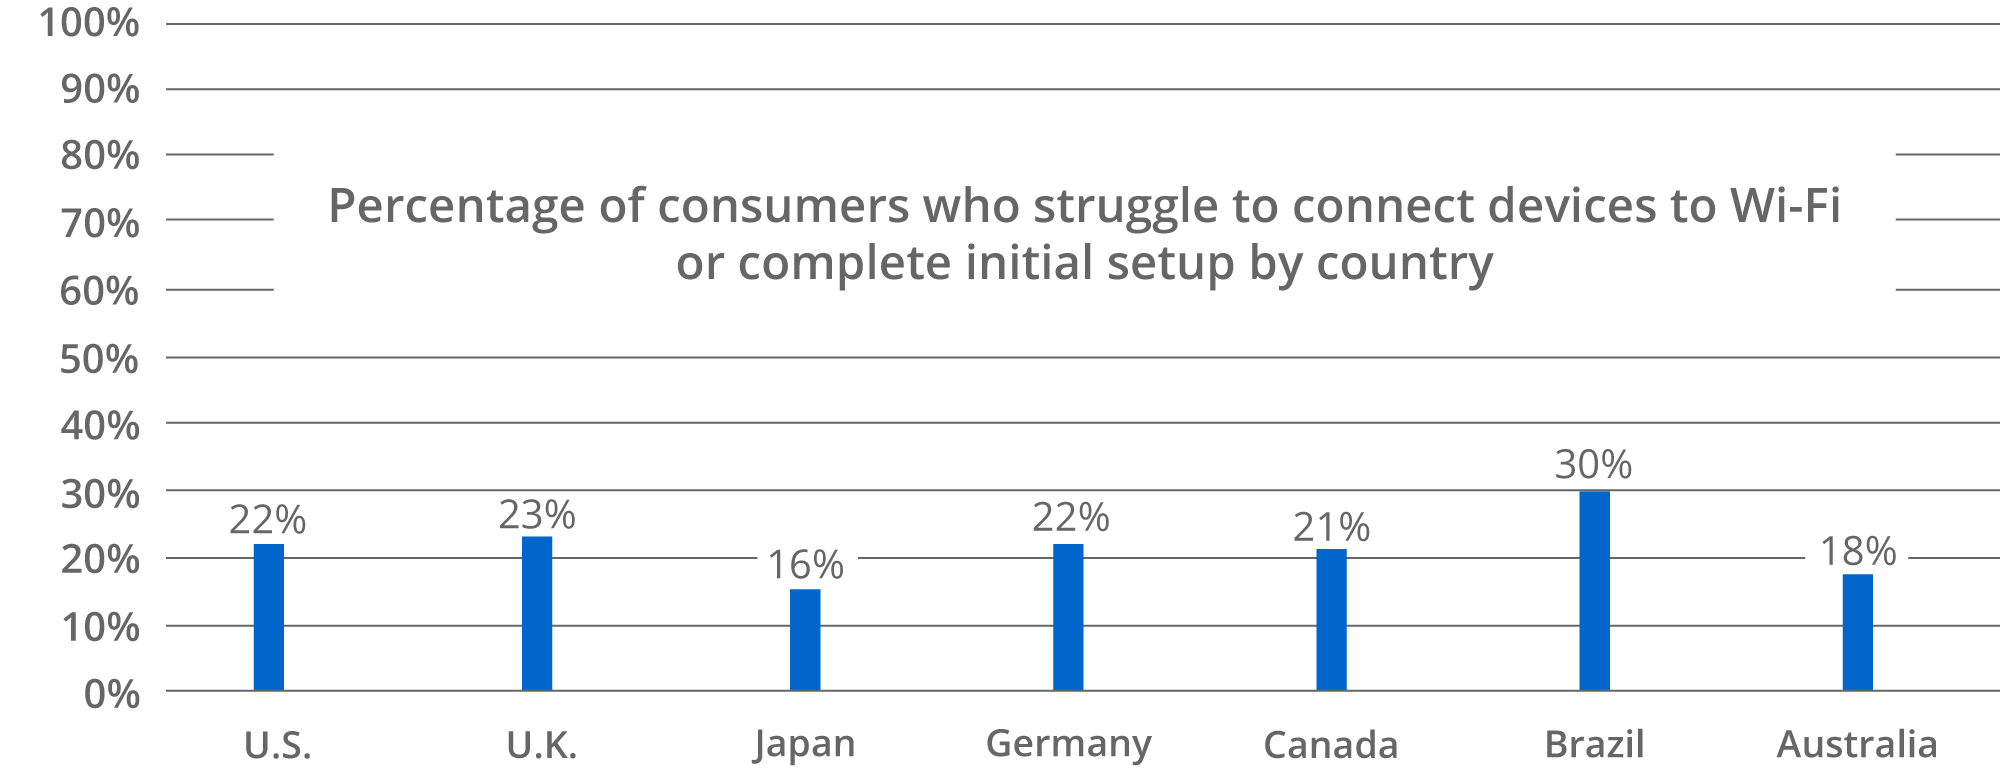 bar graph indicating the percentage of consumers who struggle to connect their devices to WiFi based on country